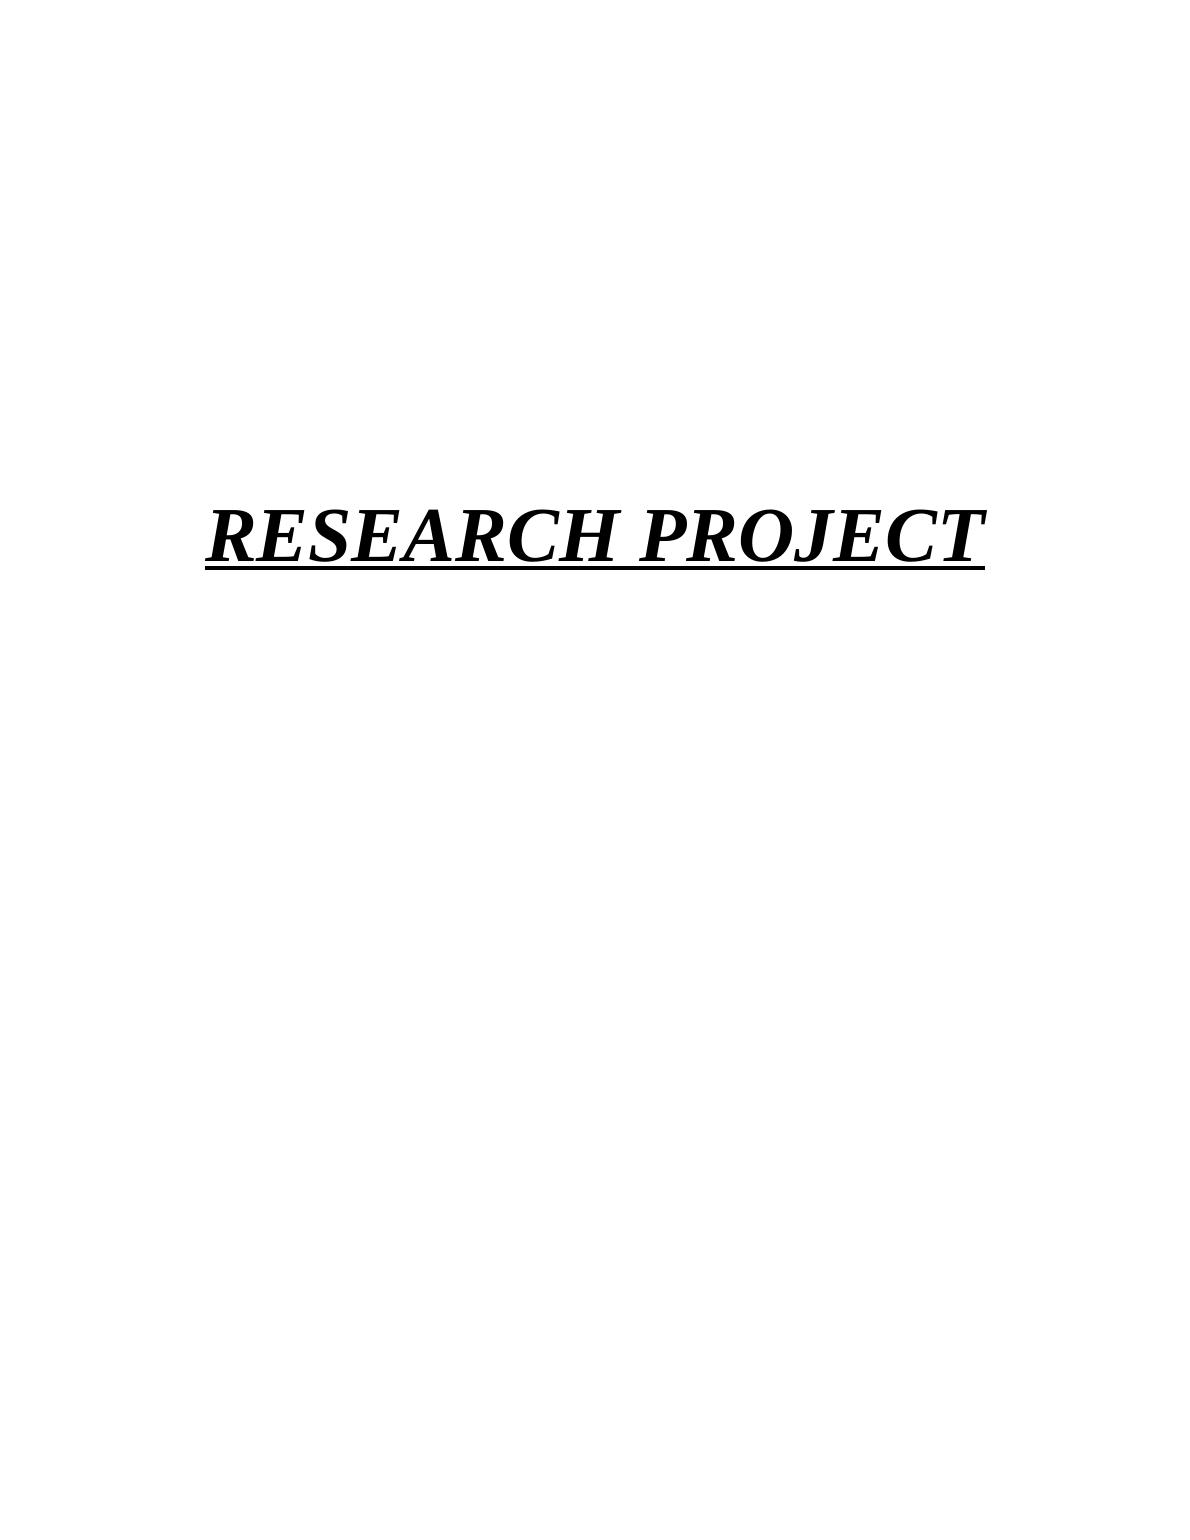 Quality Management Research Project_1